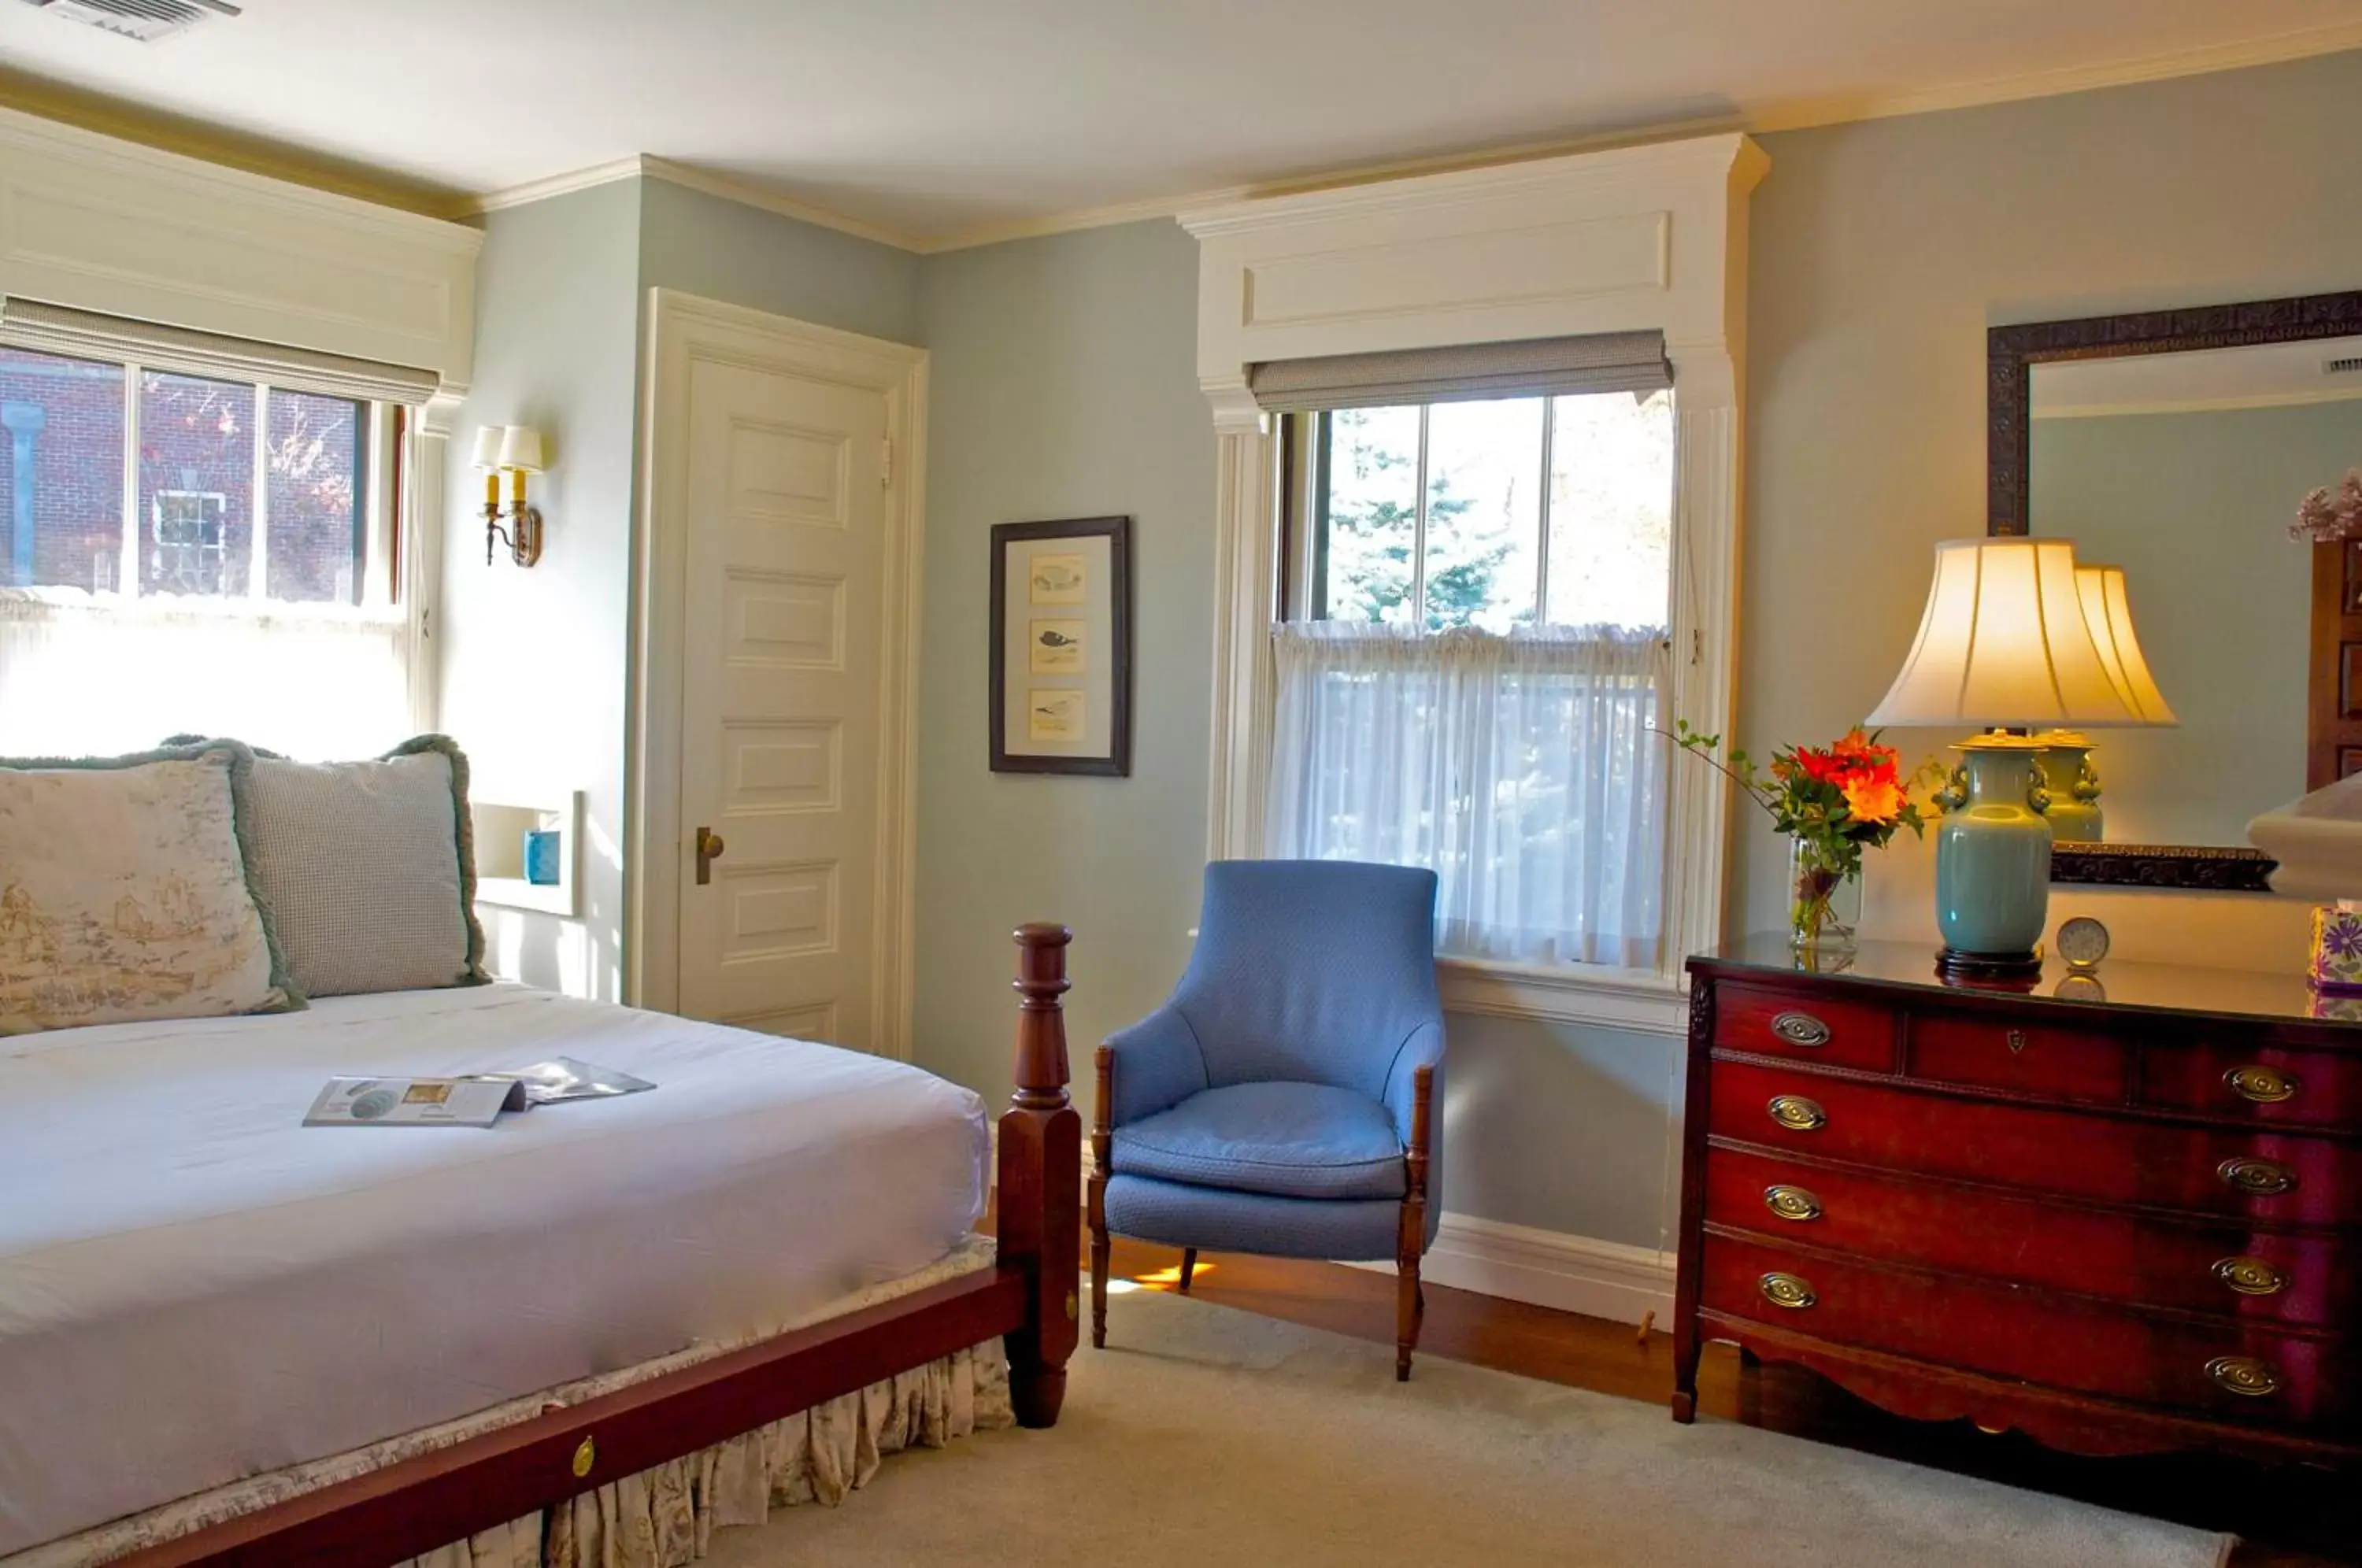 Double Room with Private Bathroom - Touro Room in Hilltop Inn